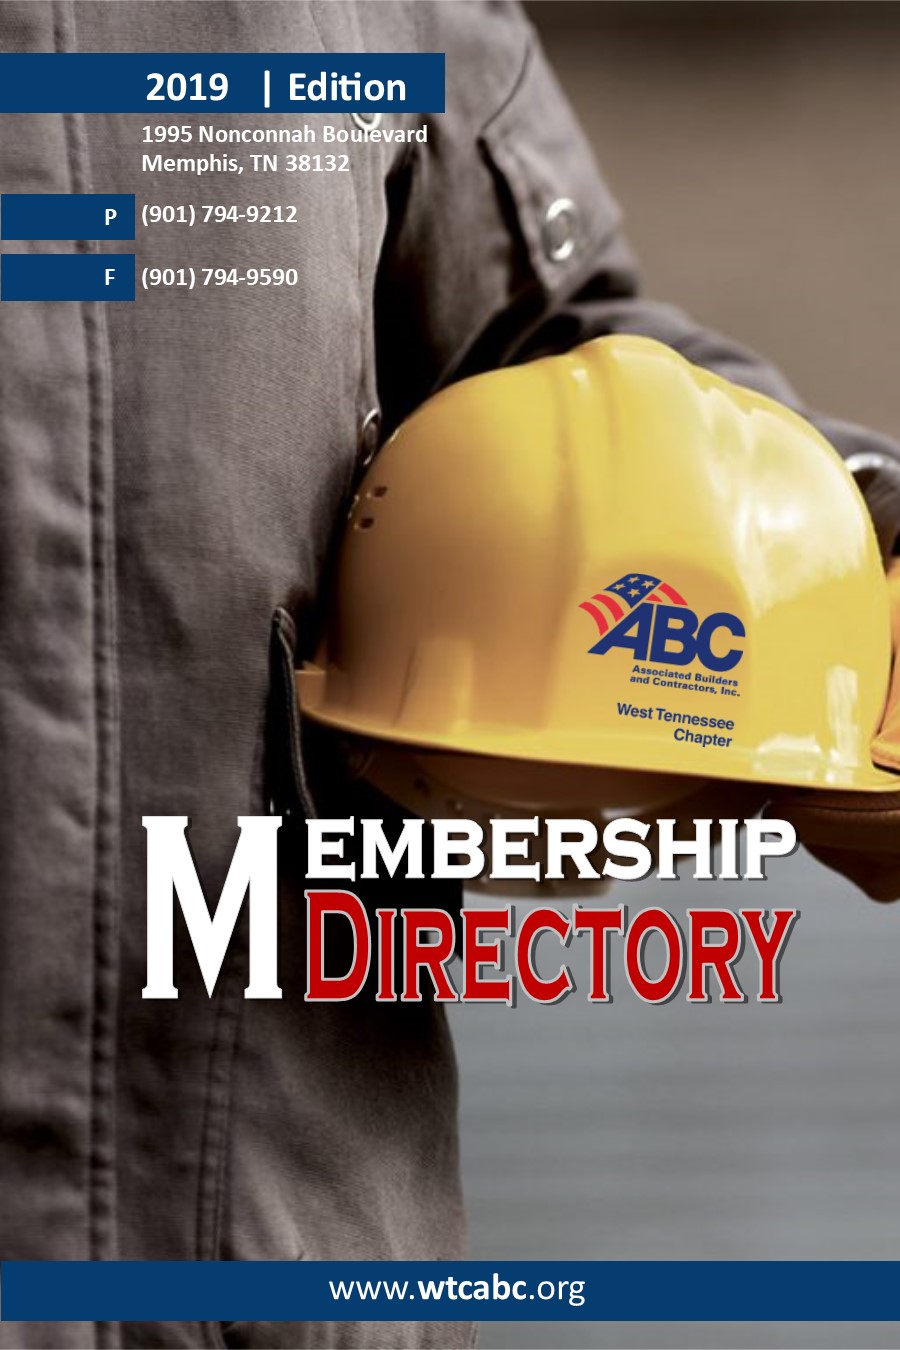 WTCABC 2019 Directory Cover TO PRINT